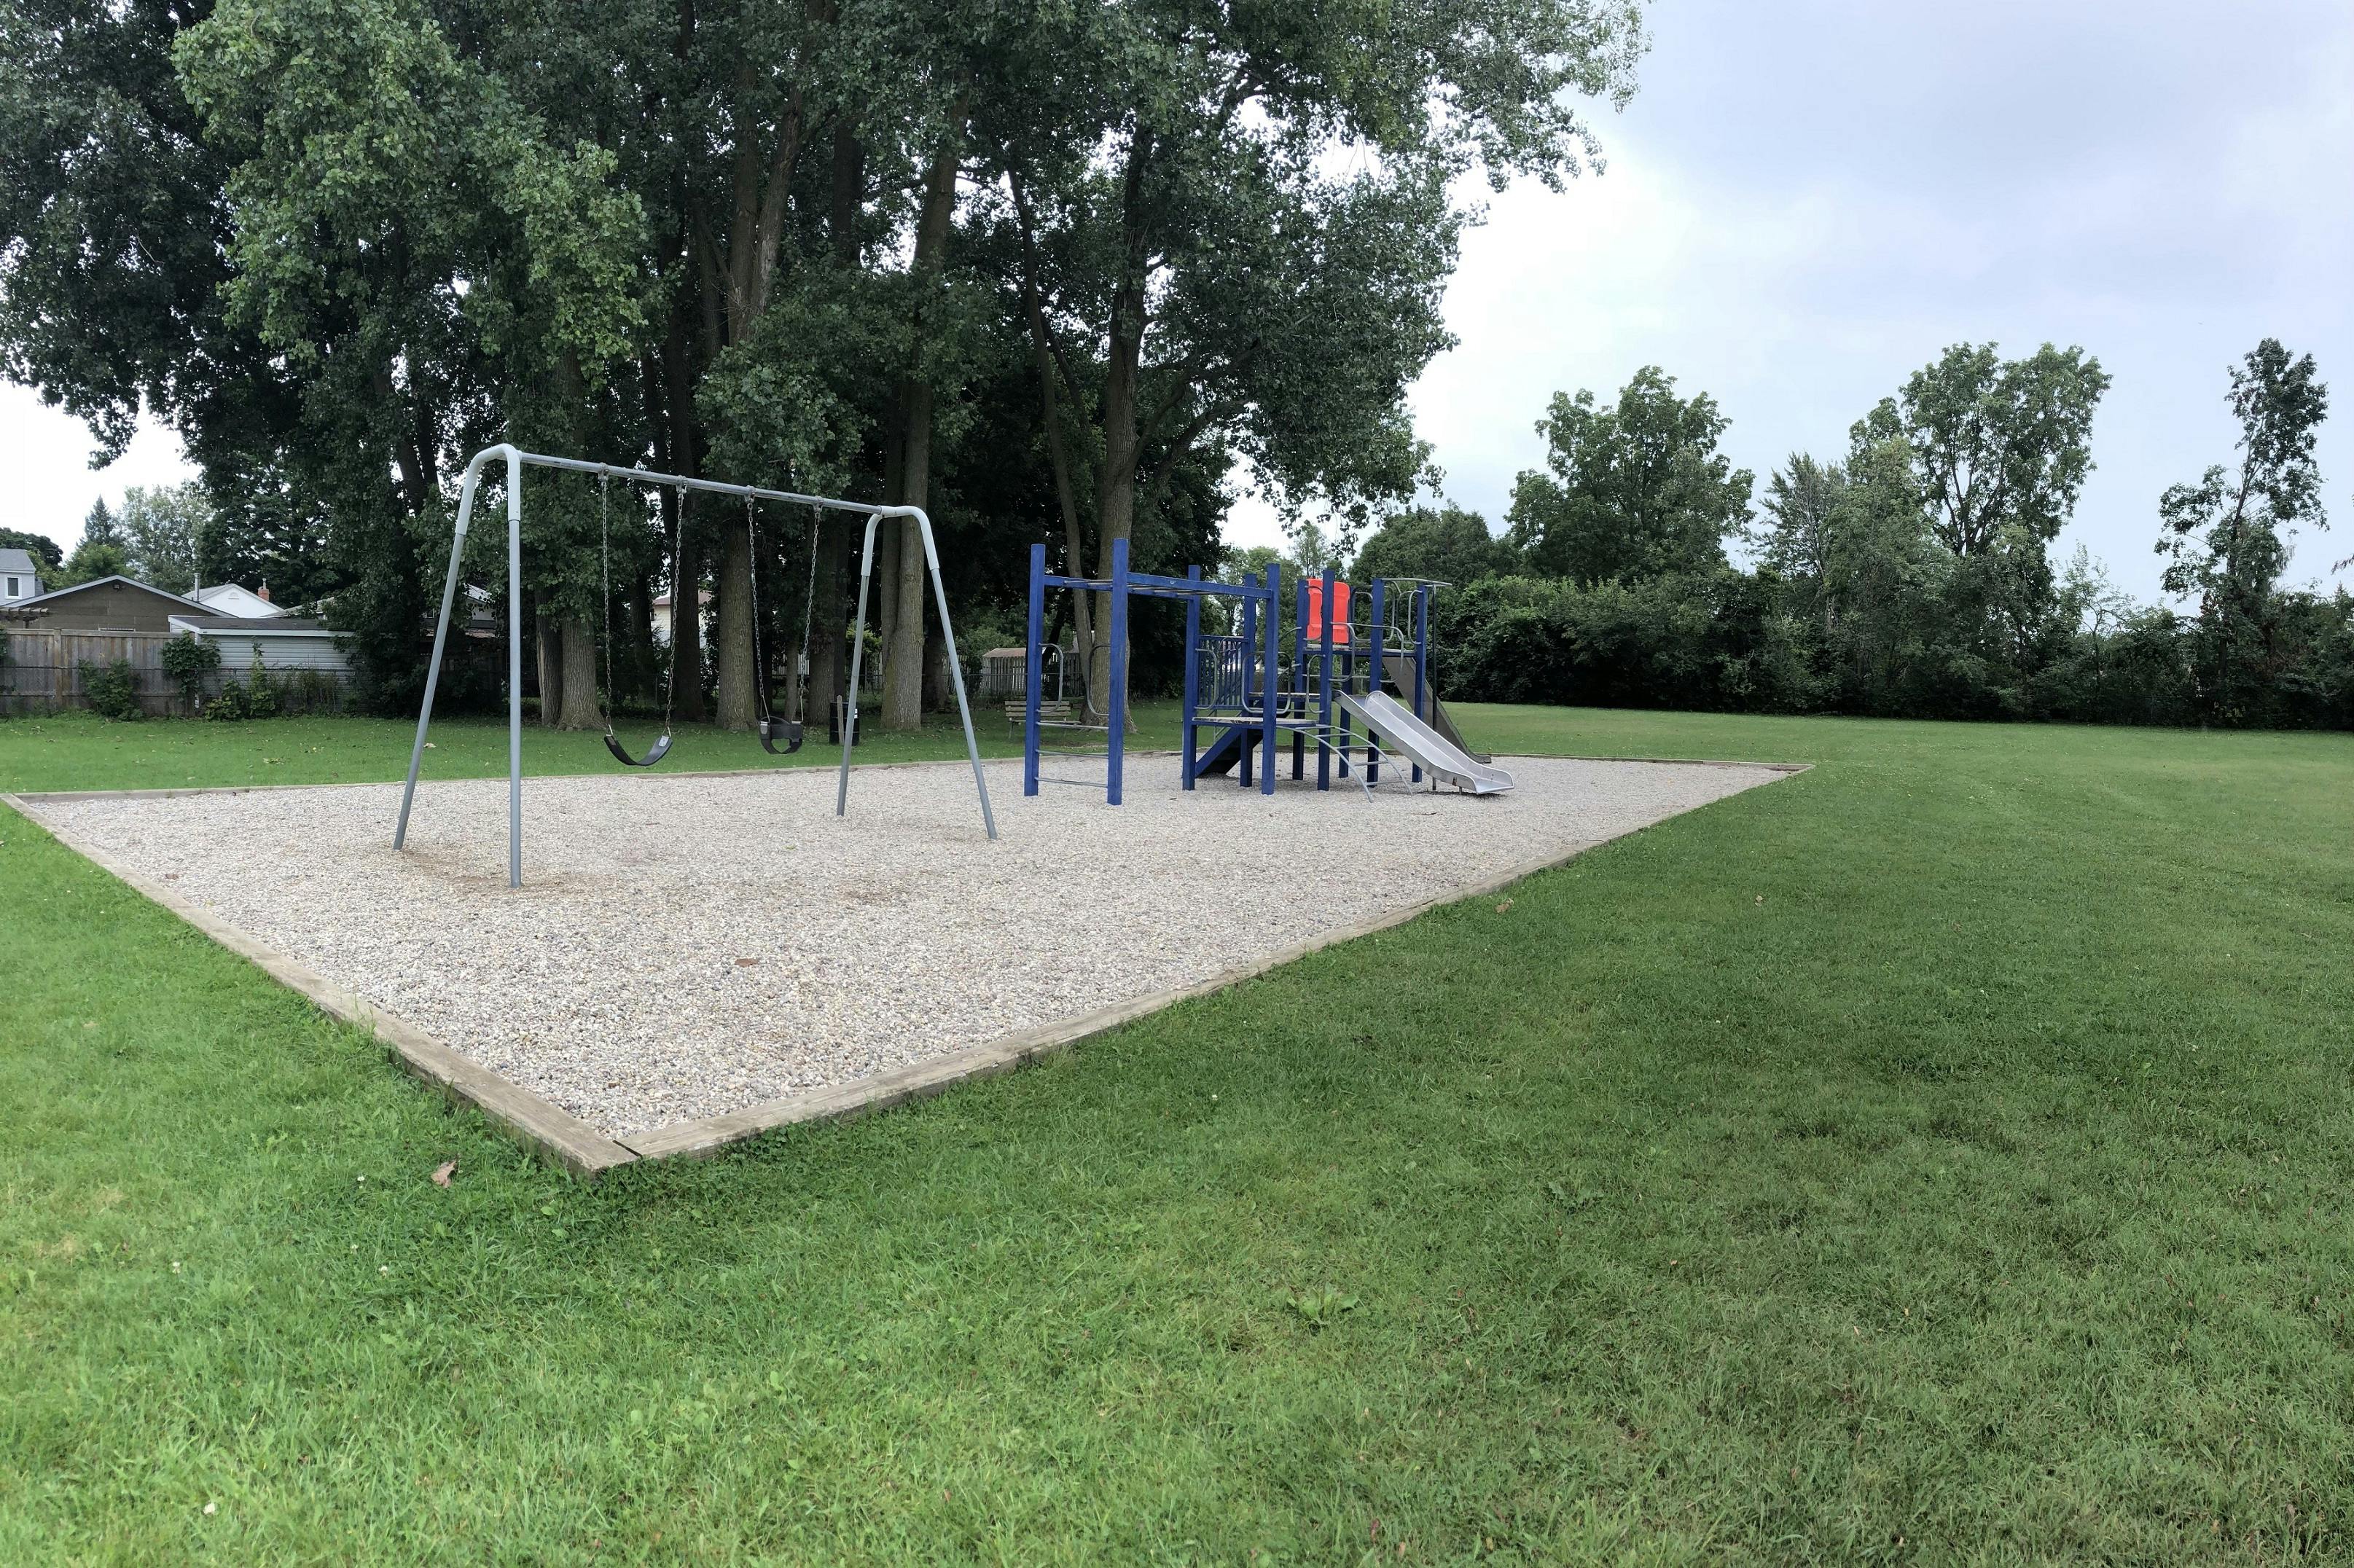 Current play equipment and swing set